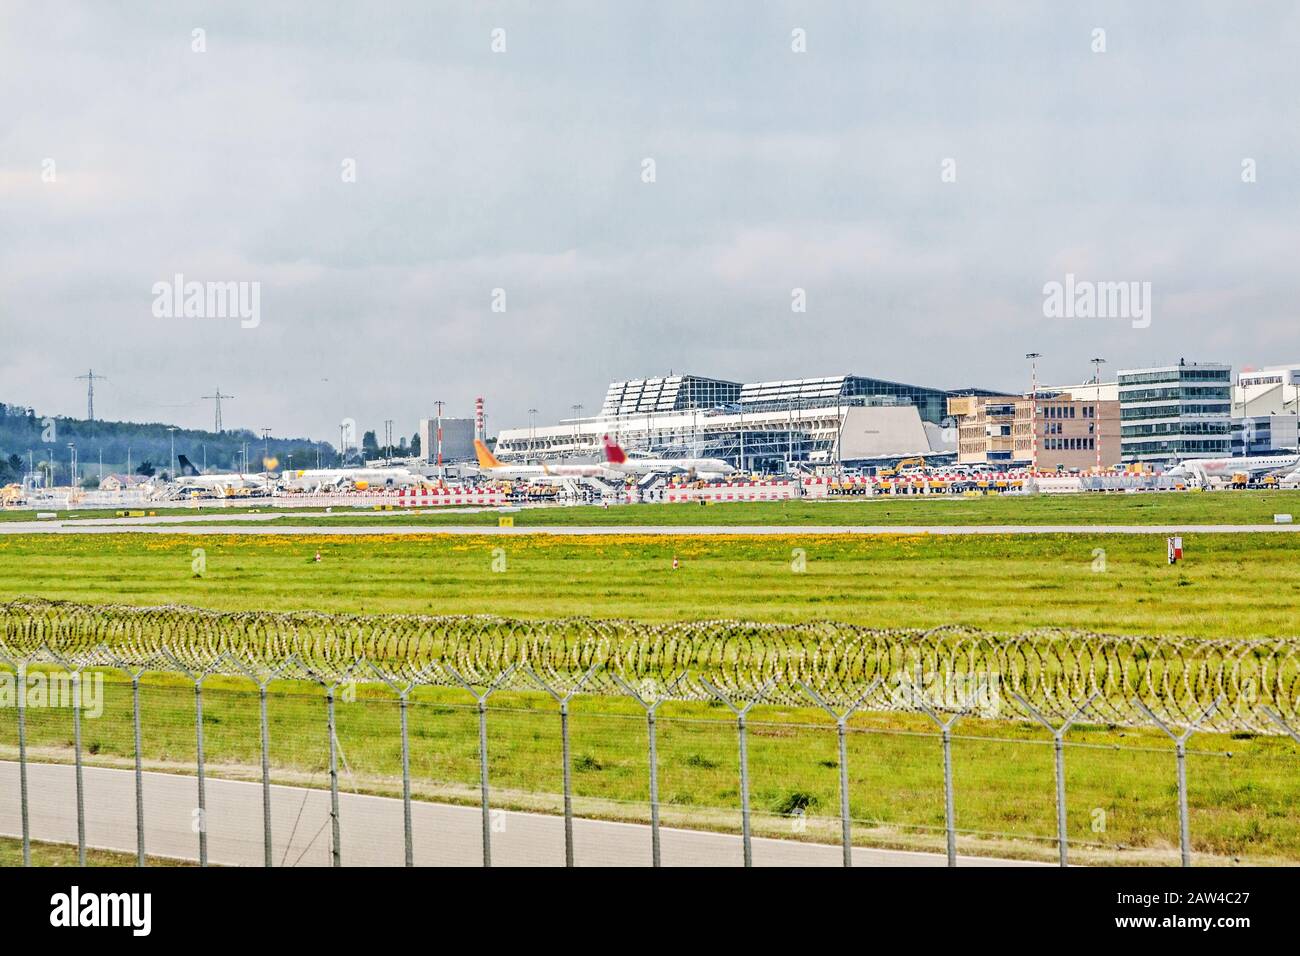 Airport Stuttgart (Manfred-Rommel-Flughafen), Terminal, exterior view with airplanes in parking position, runway in front Stock Photo